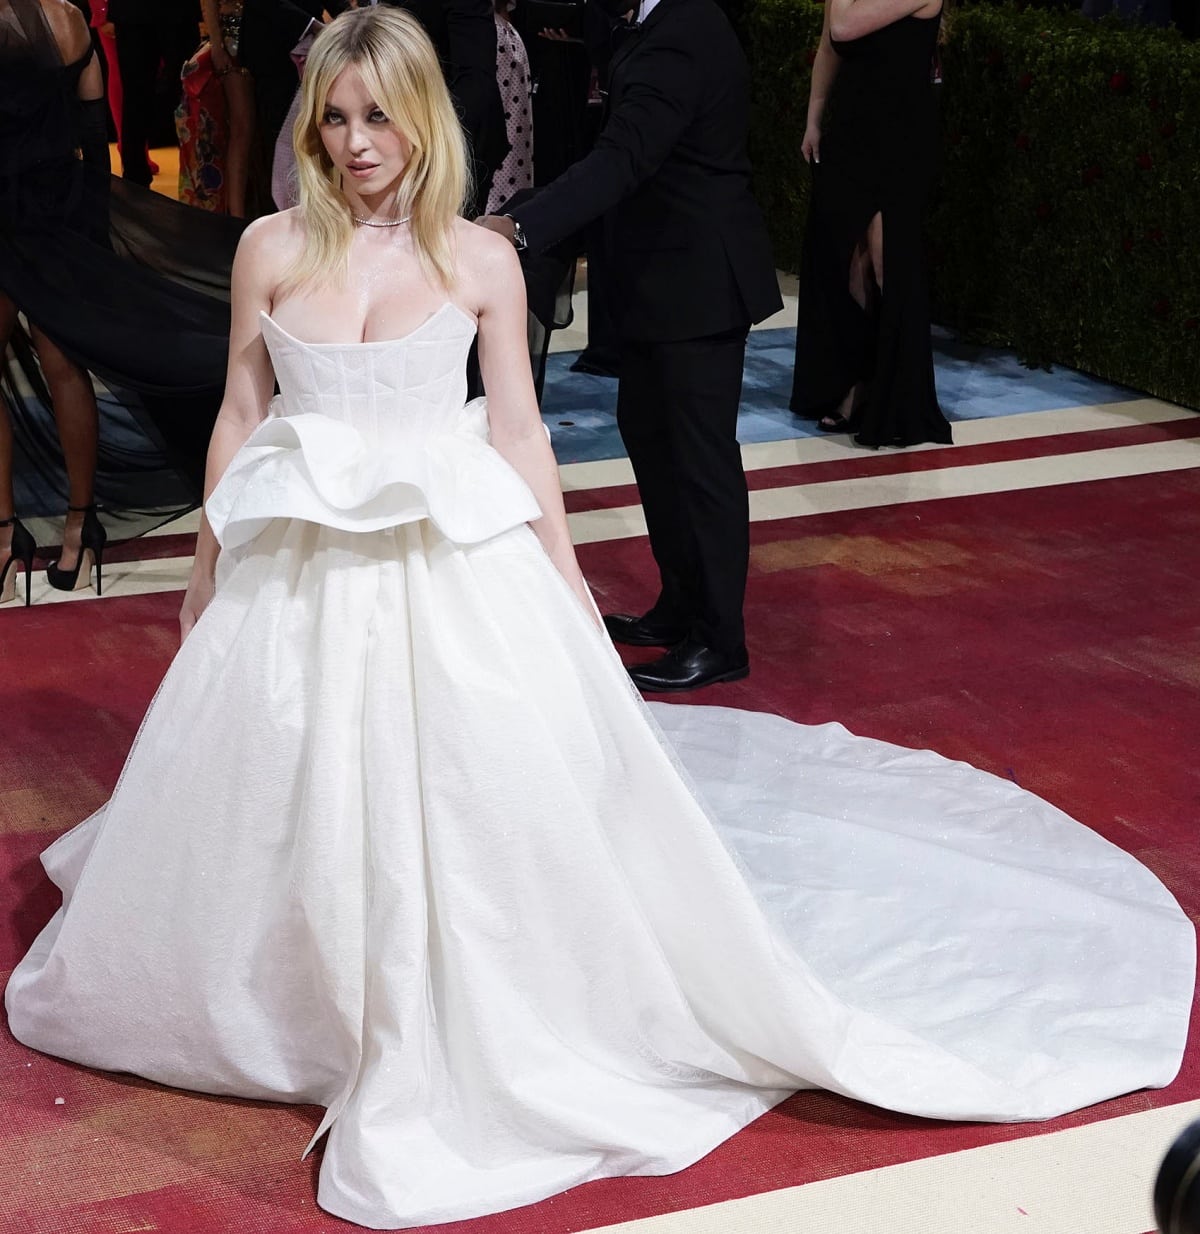 For her first Met Gala, Sydney Sweeney wore a custom Tory Burch gown